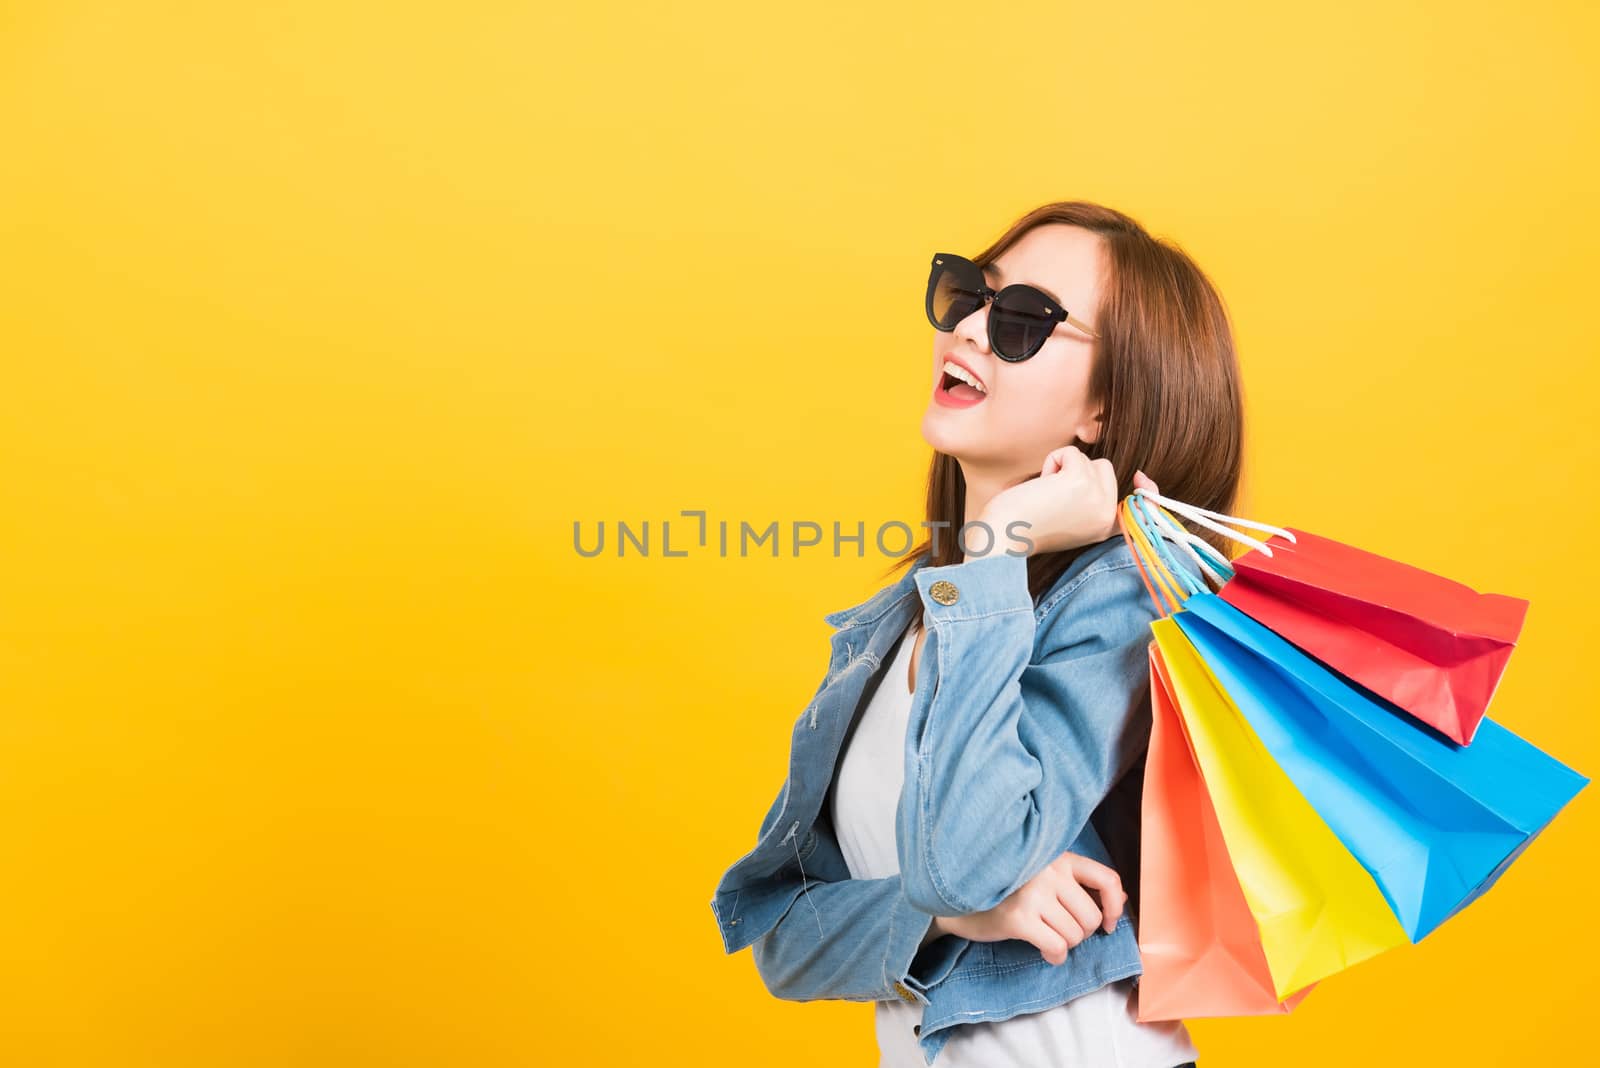 Asian happy portrait beautiful cute young woman teen smiling standing with sunglasses excited holding shopping bags multi color looking up isolated, studio shot yellow background with copy space